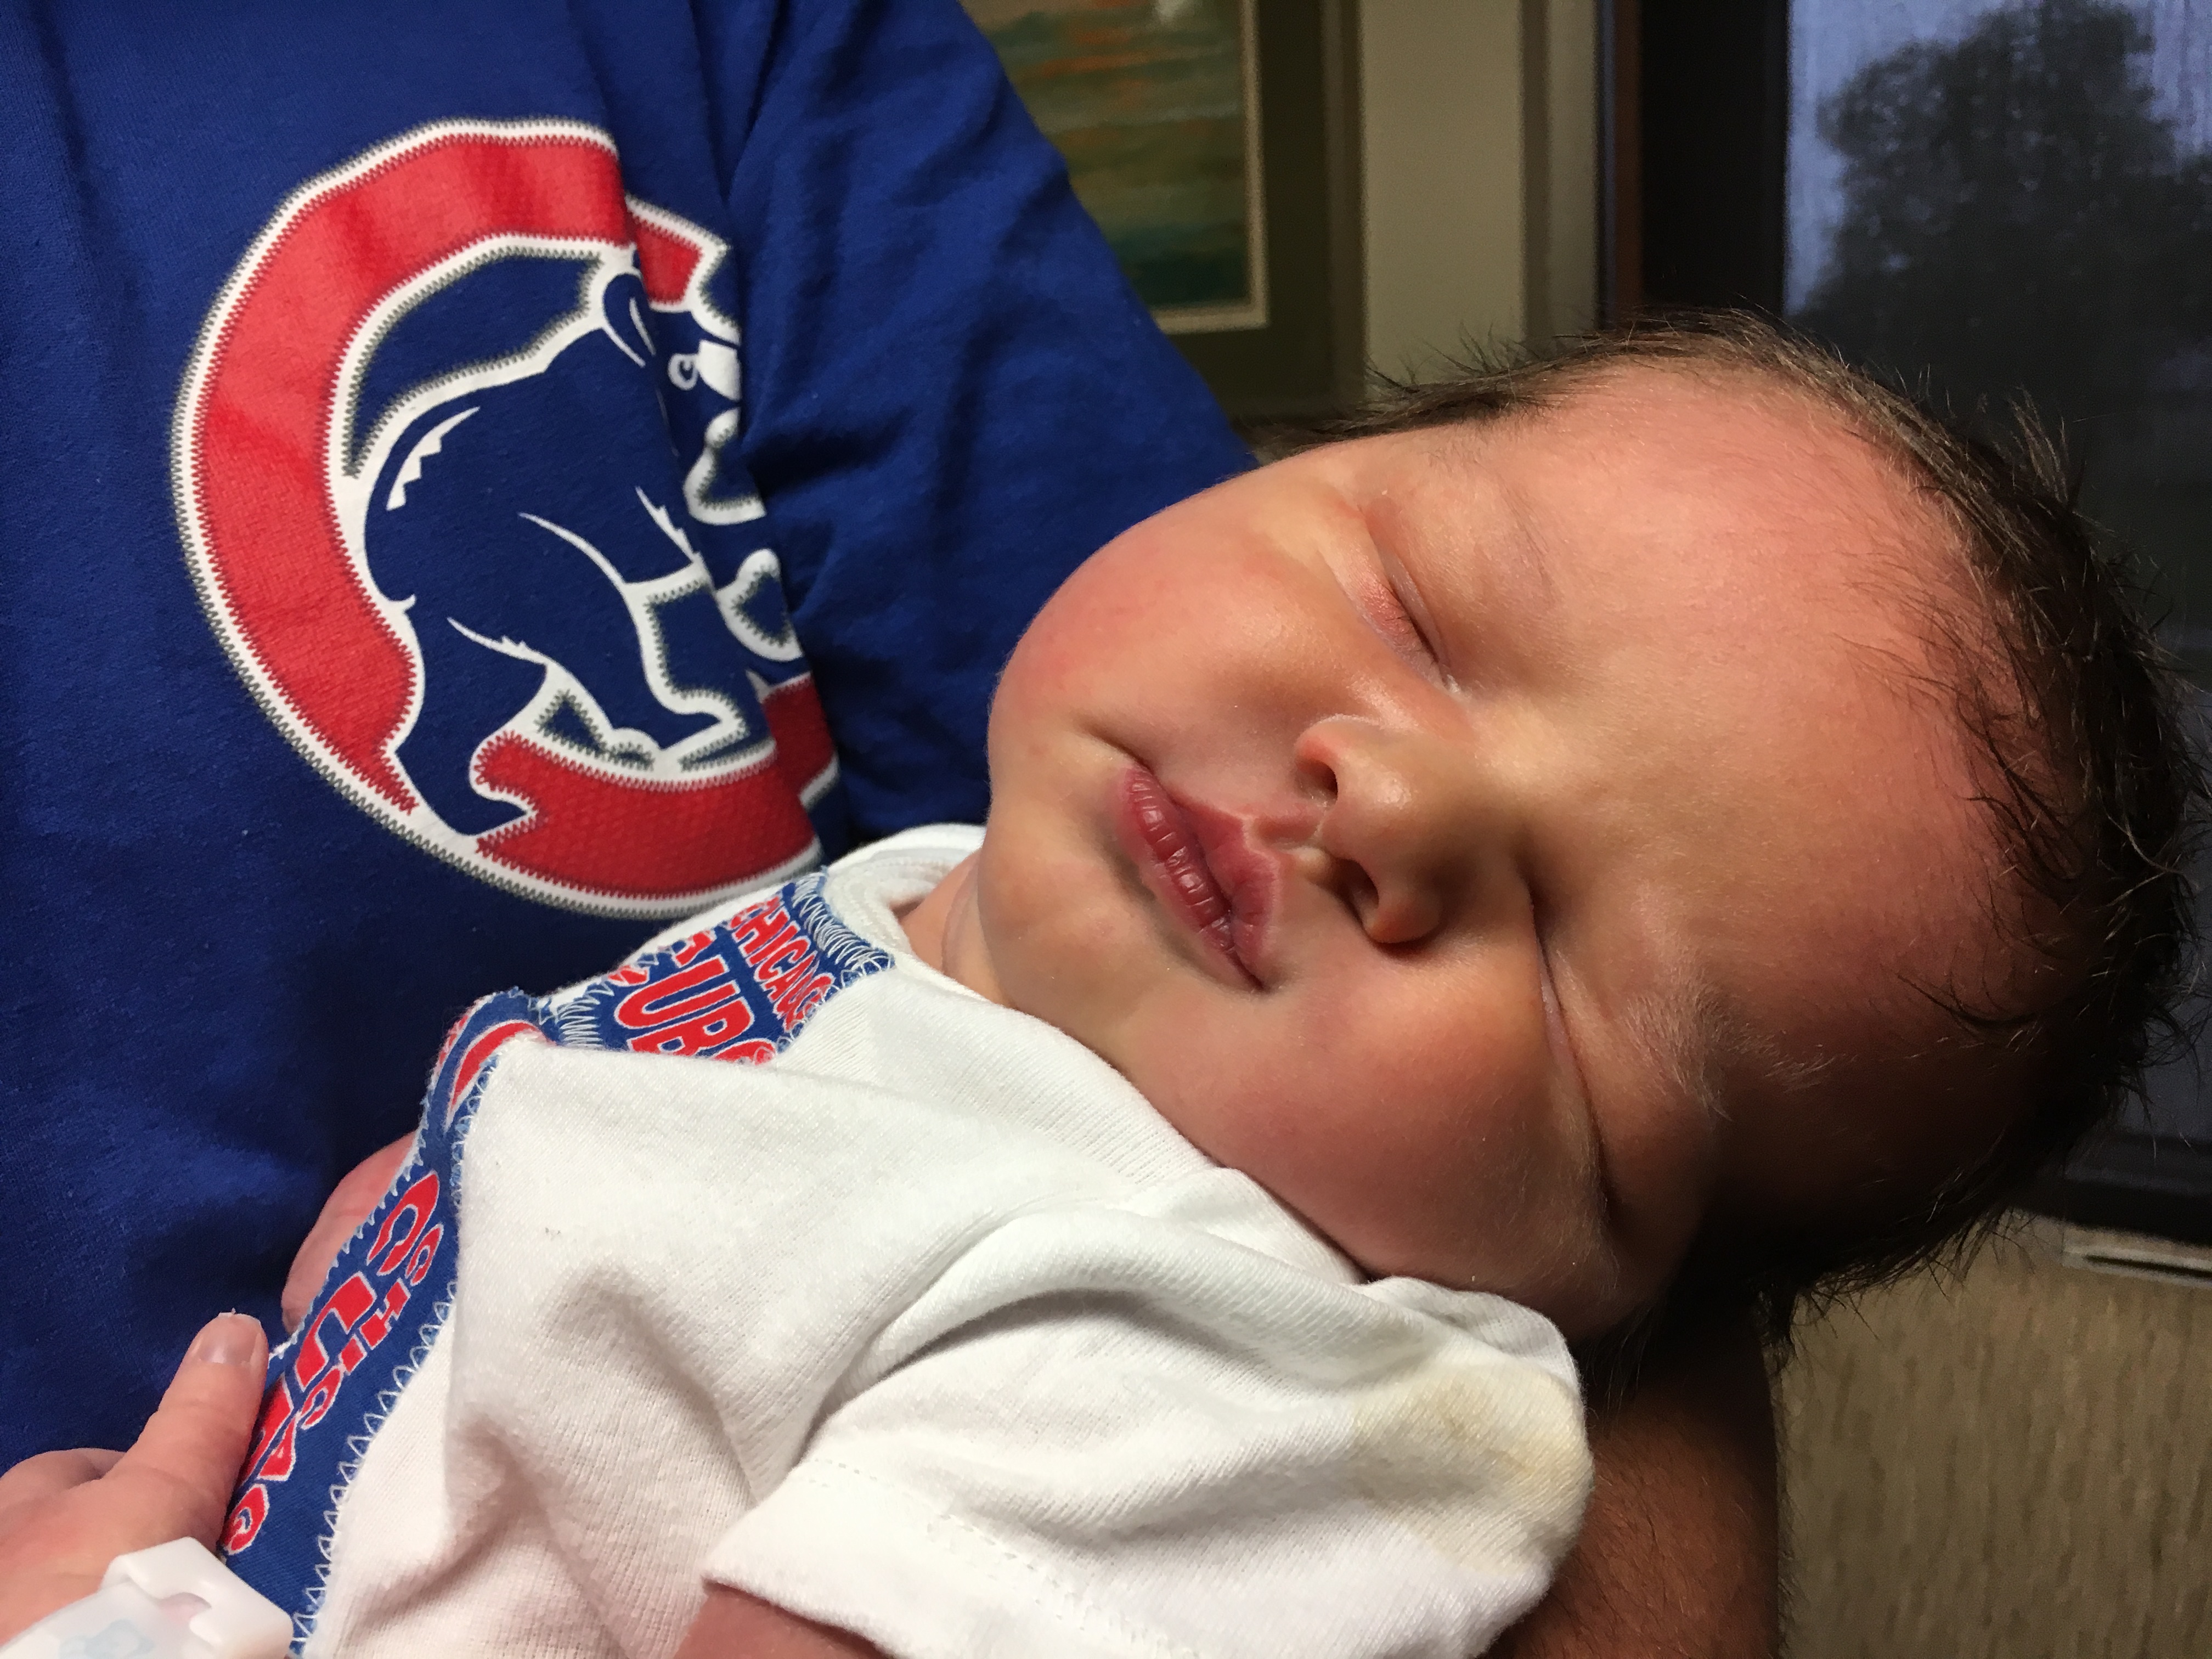 Chicago experiencing baby boom 9 months after Cubs World Series win